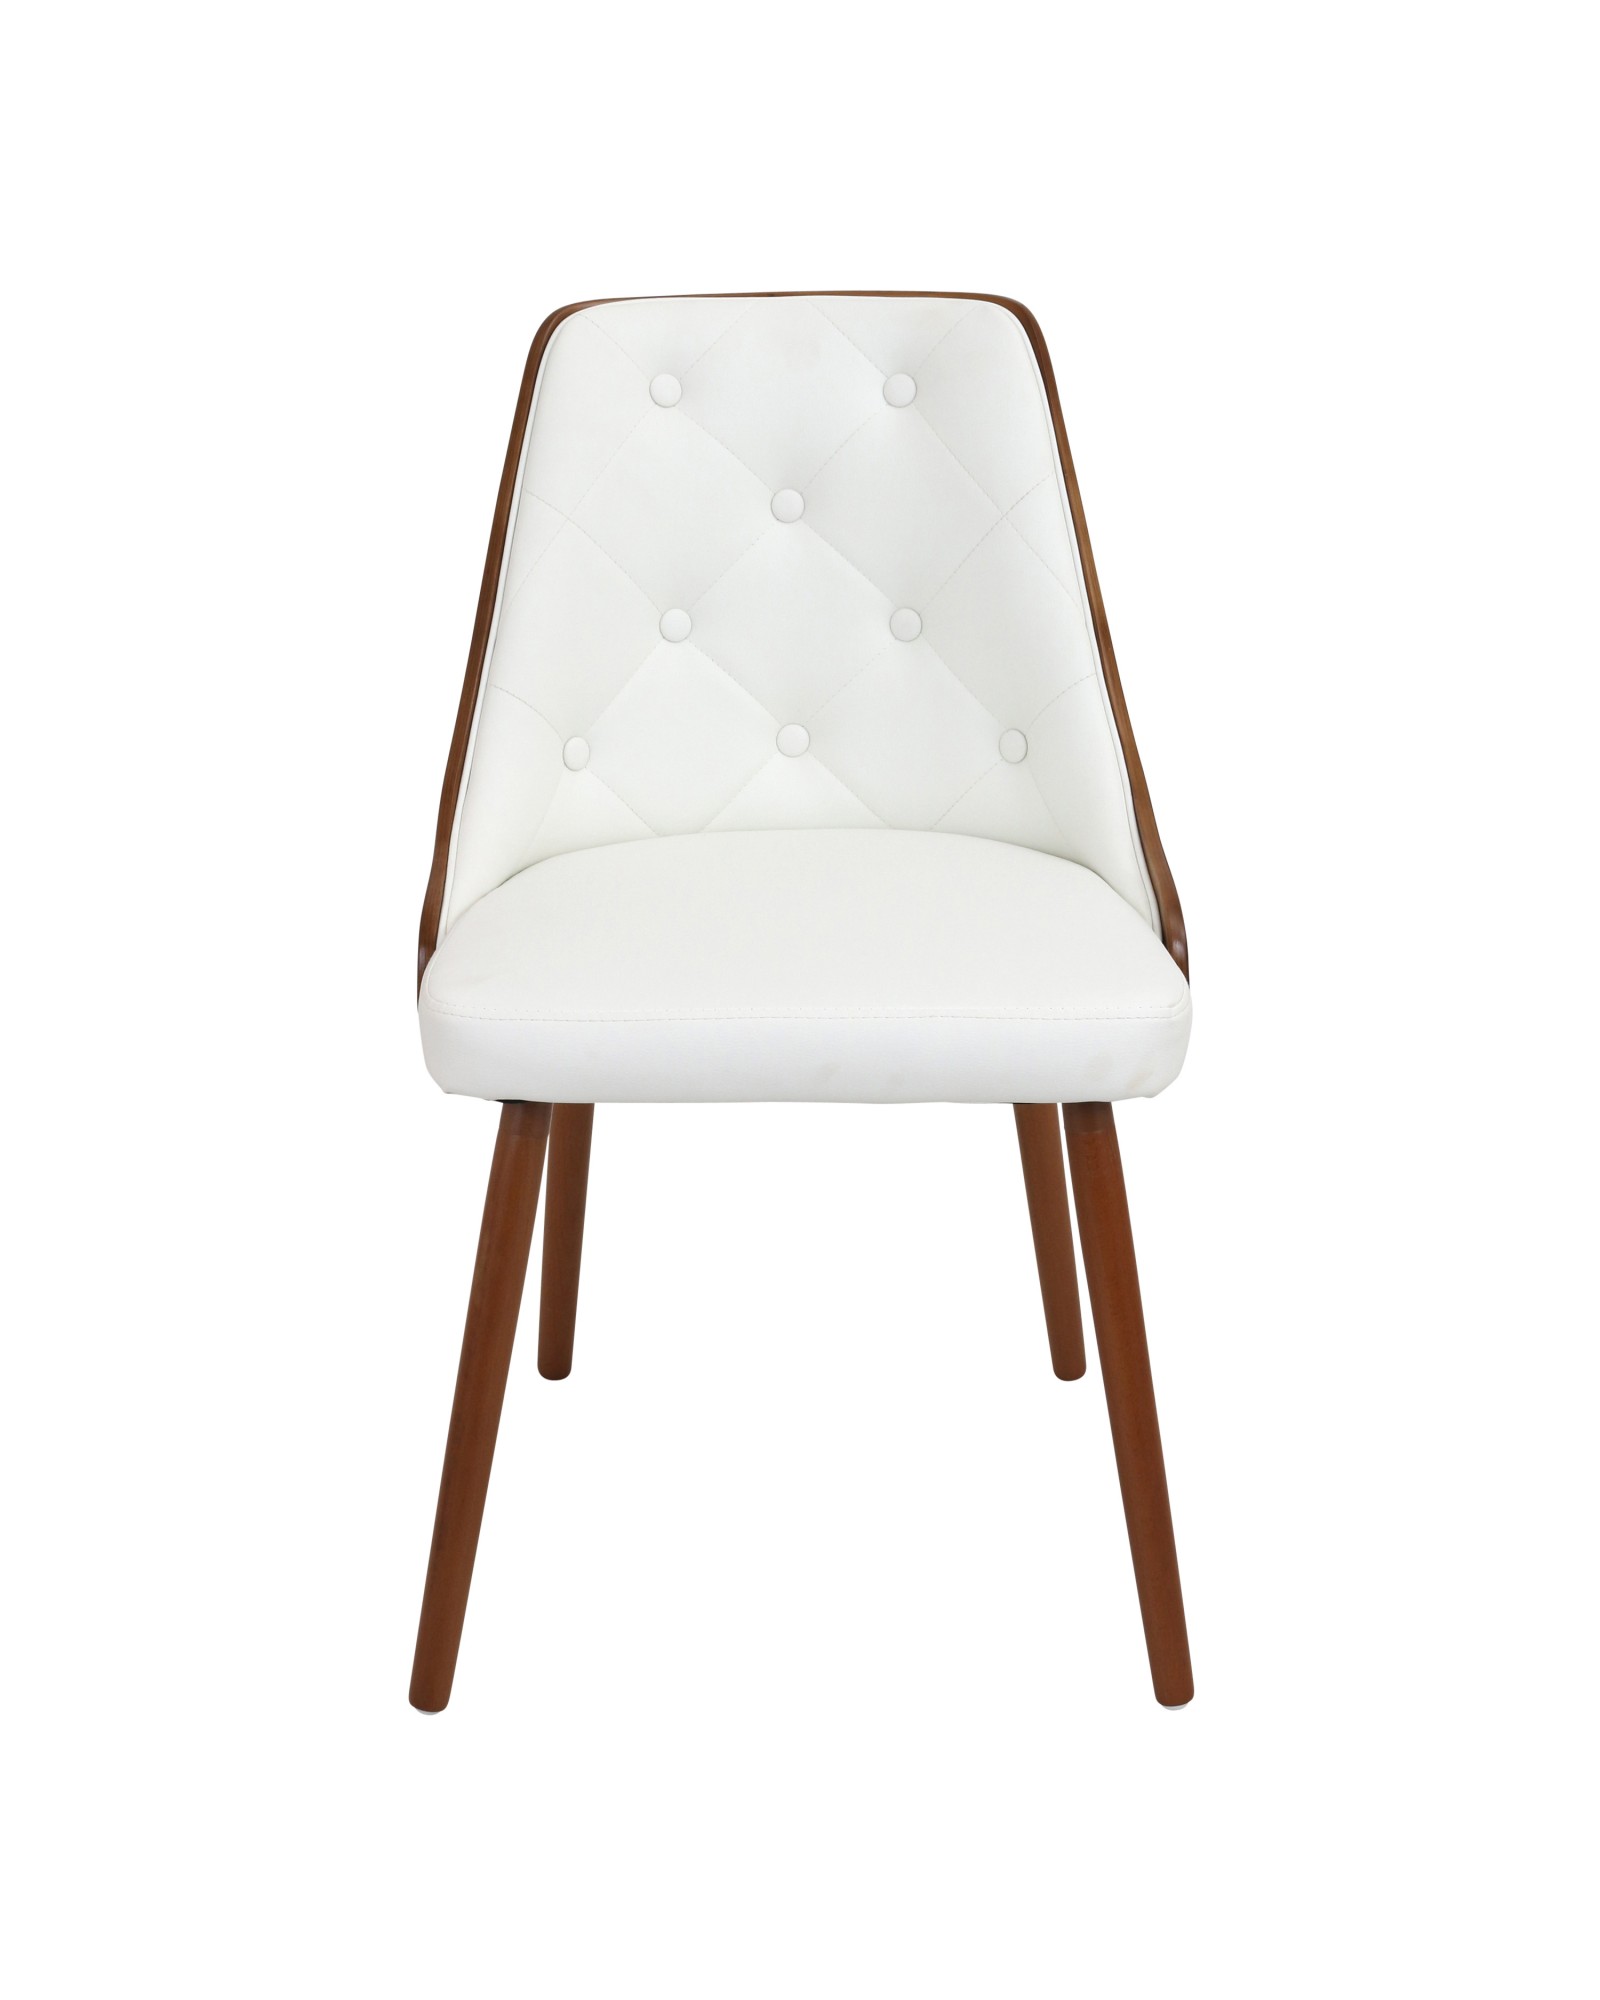 Gianna Mid-Century Modern Dining/Accent Chair in Walnut with White Faux Leather